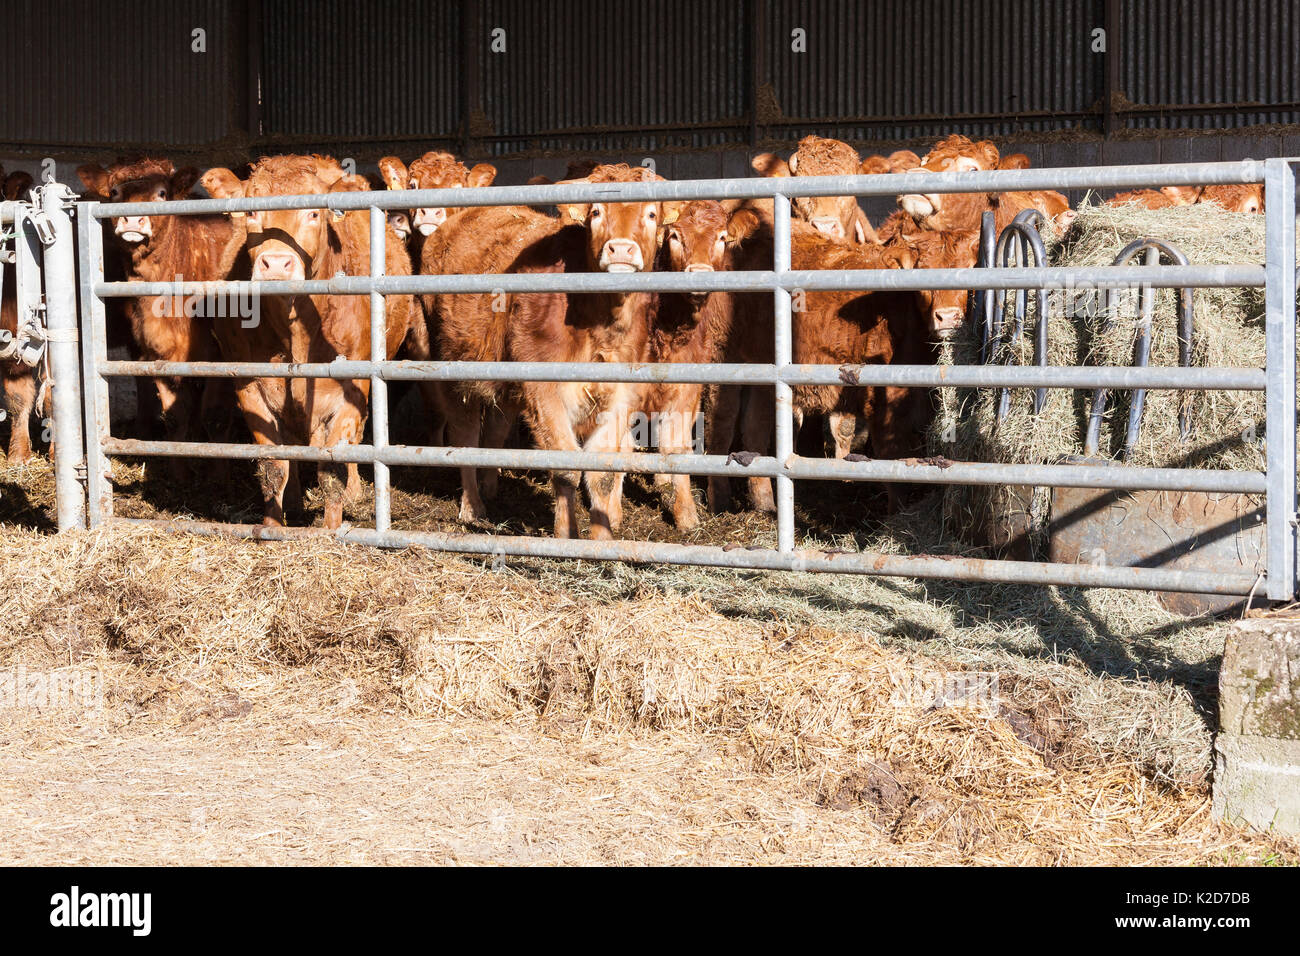 Herd of young Limousin beef bullocks or steers  with two cows in an open barn at the end of winter perring longingly through the metal bars as they wa Stock Photo